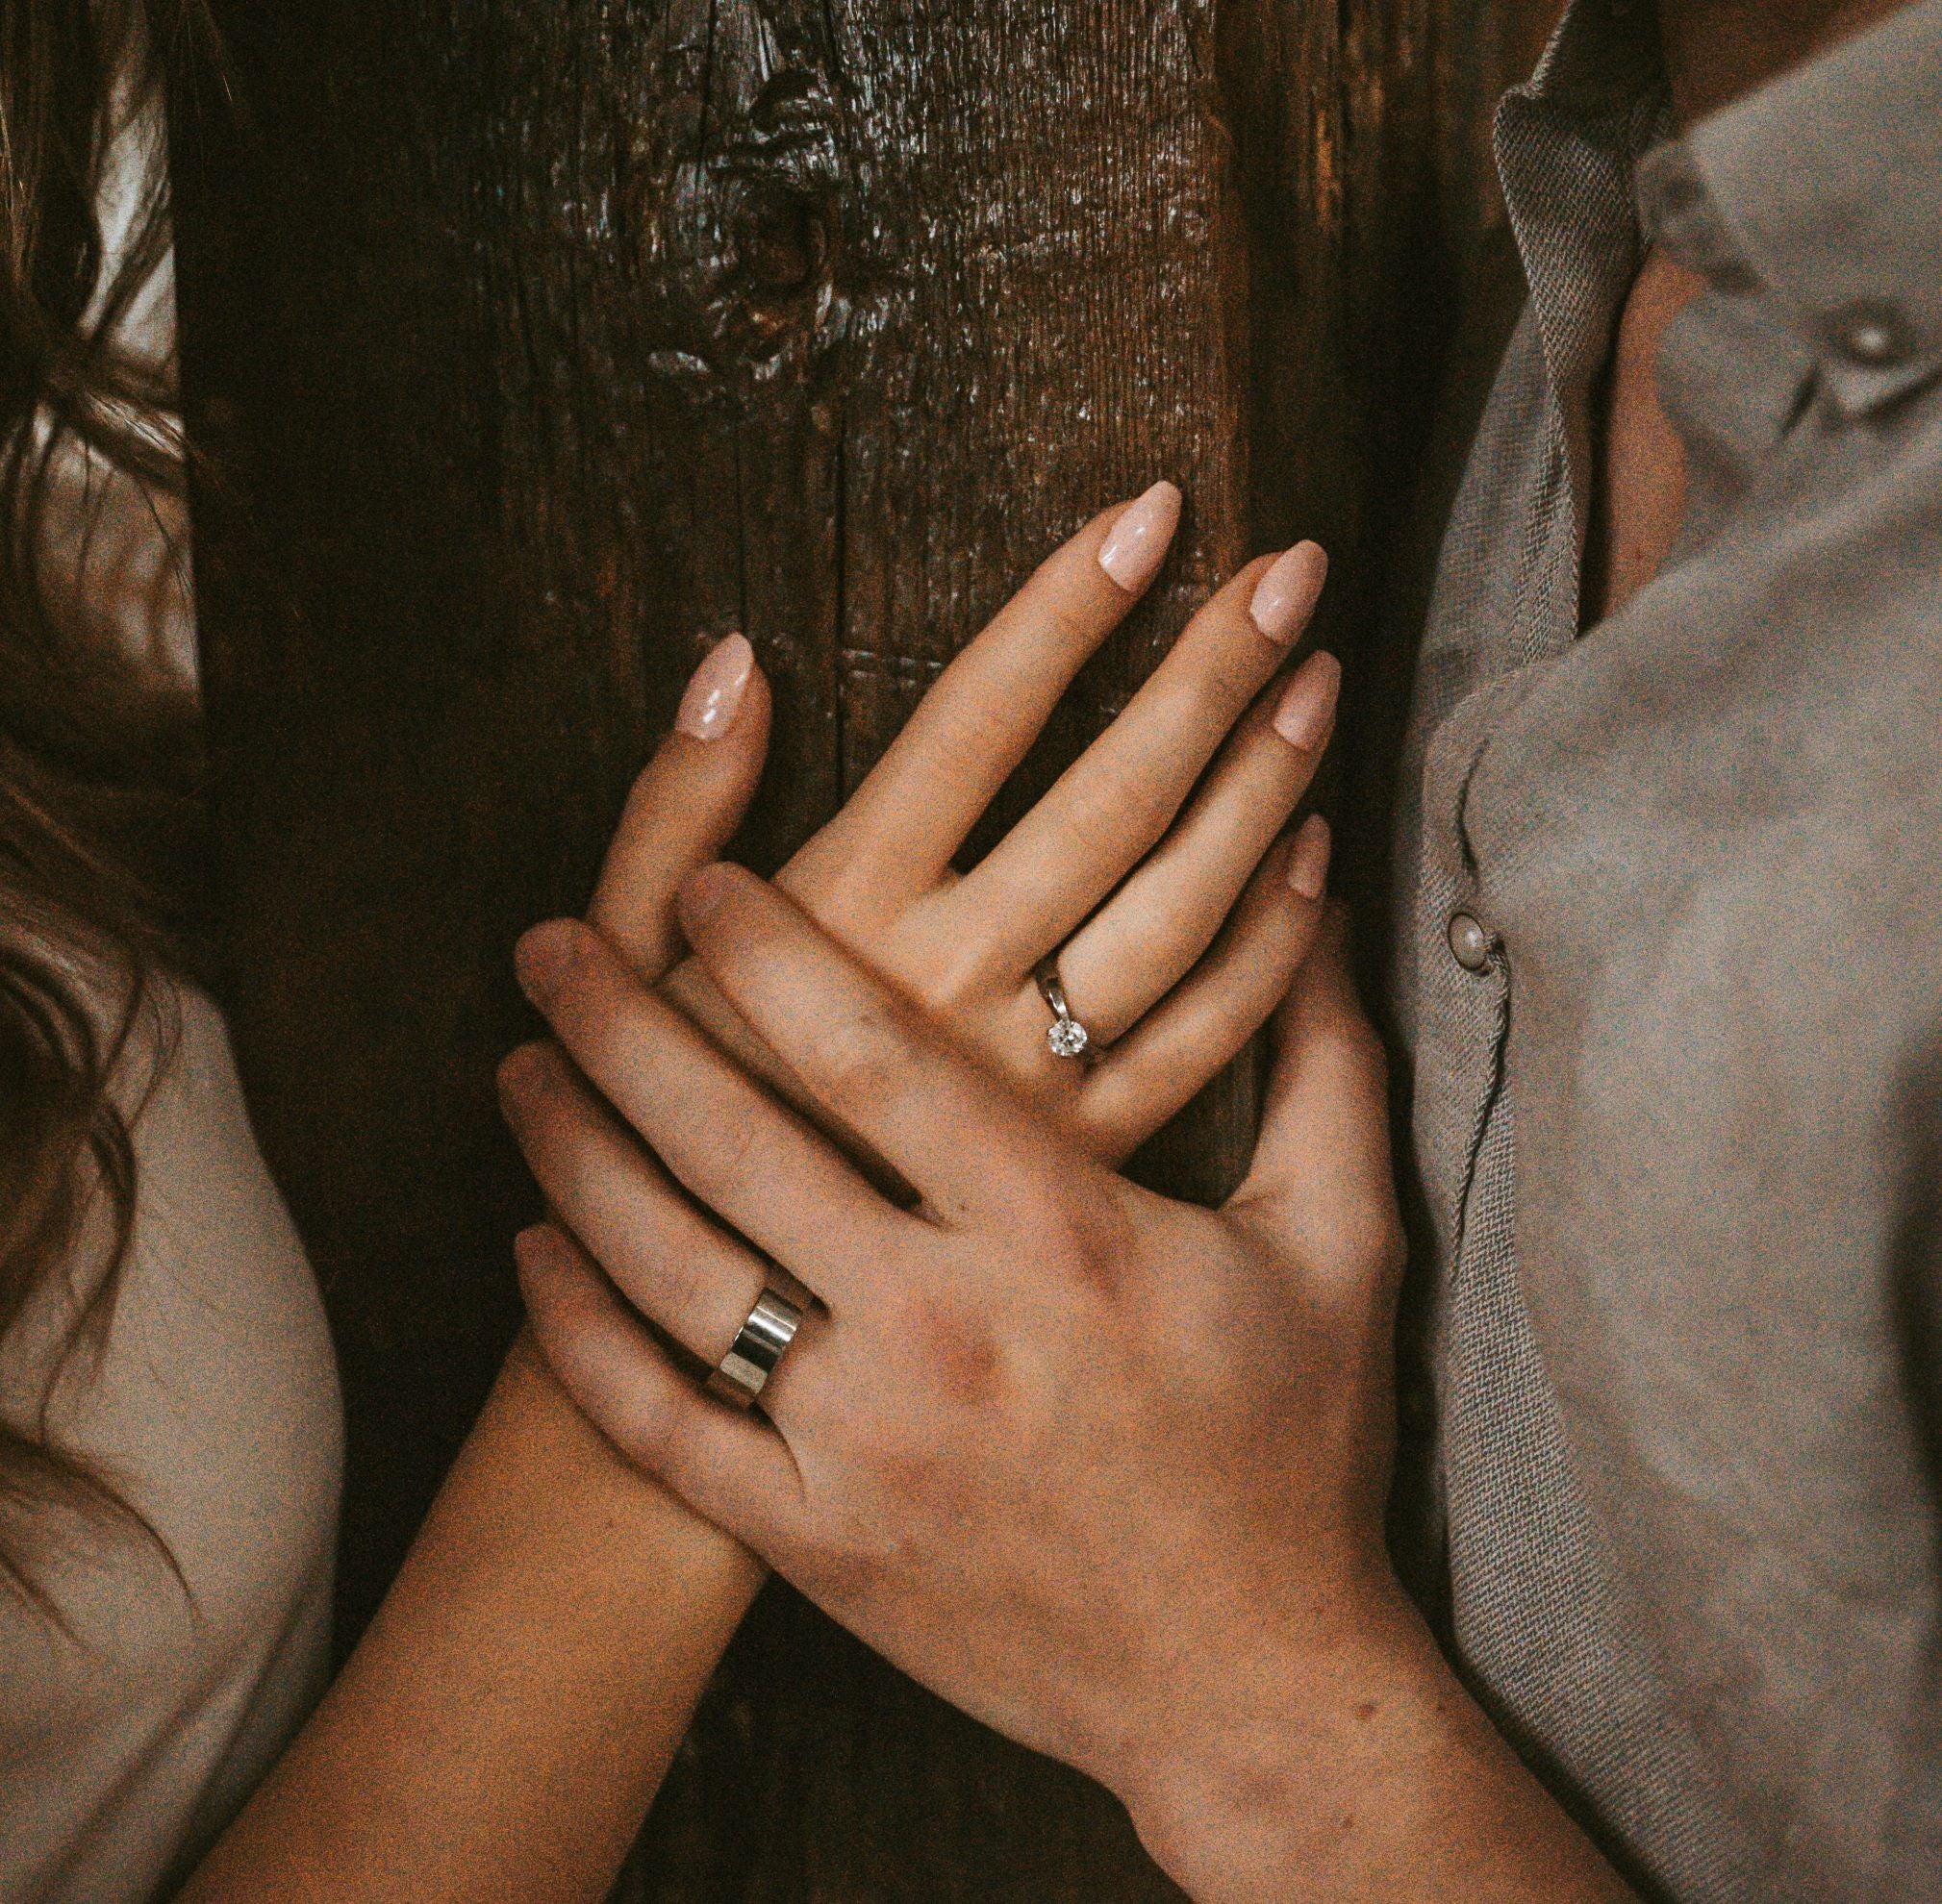 5 Ways to Keep Your Wedding Ring Safe